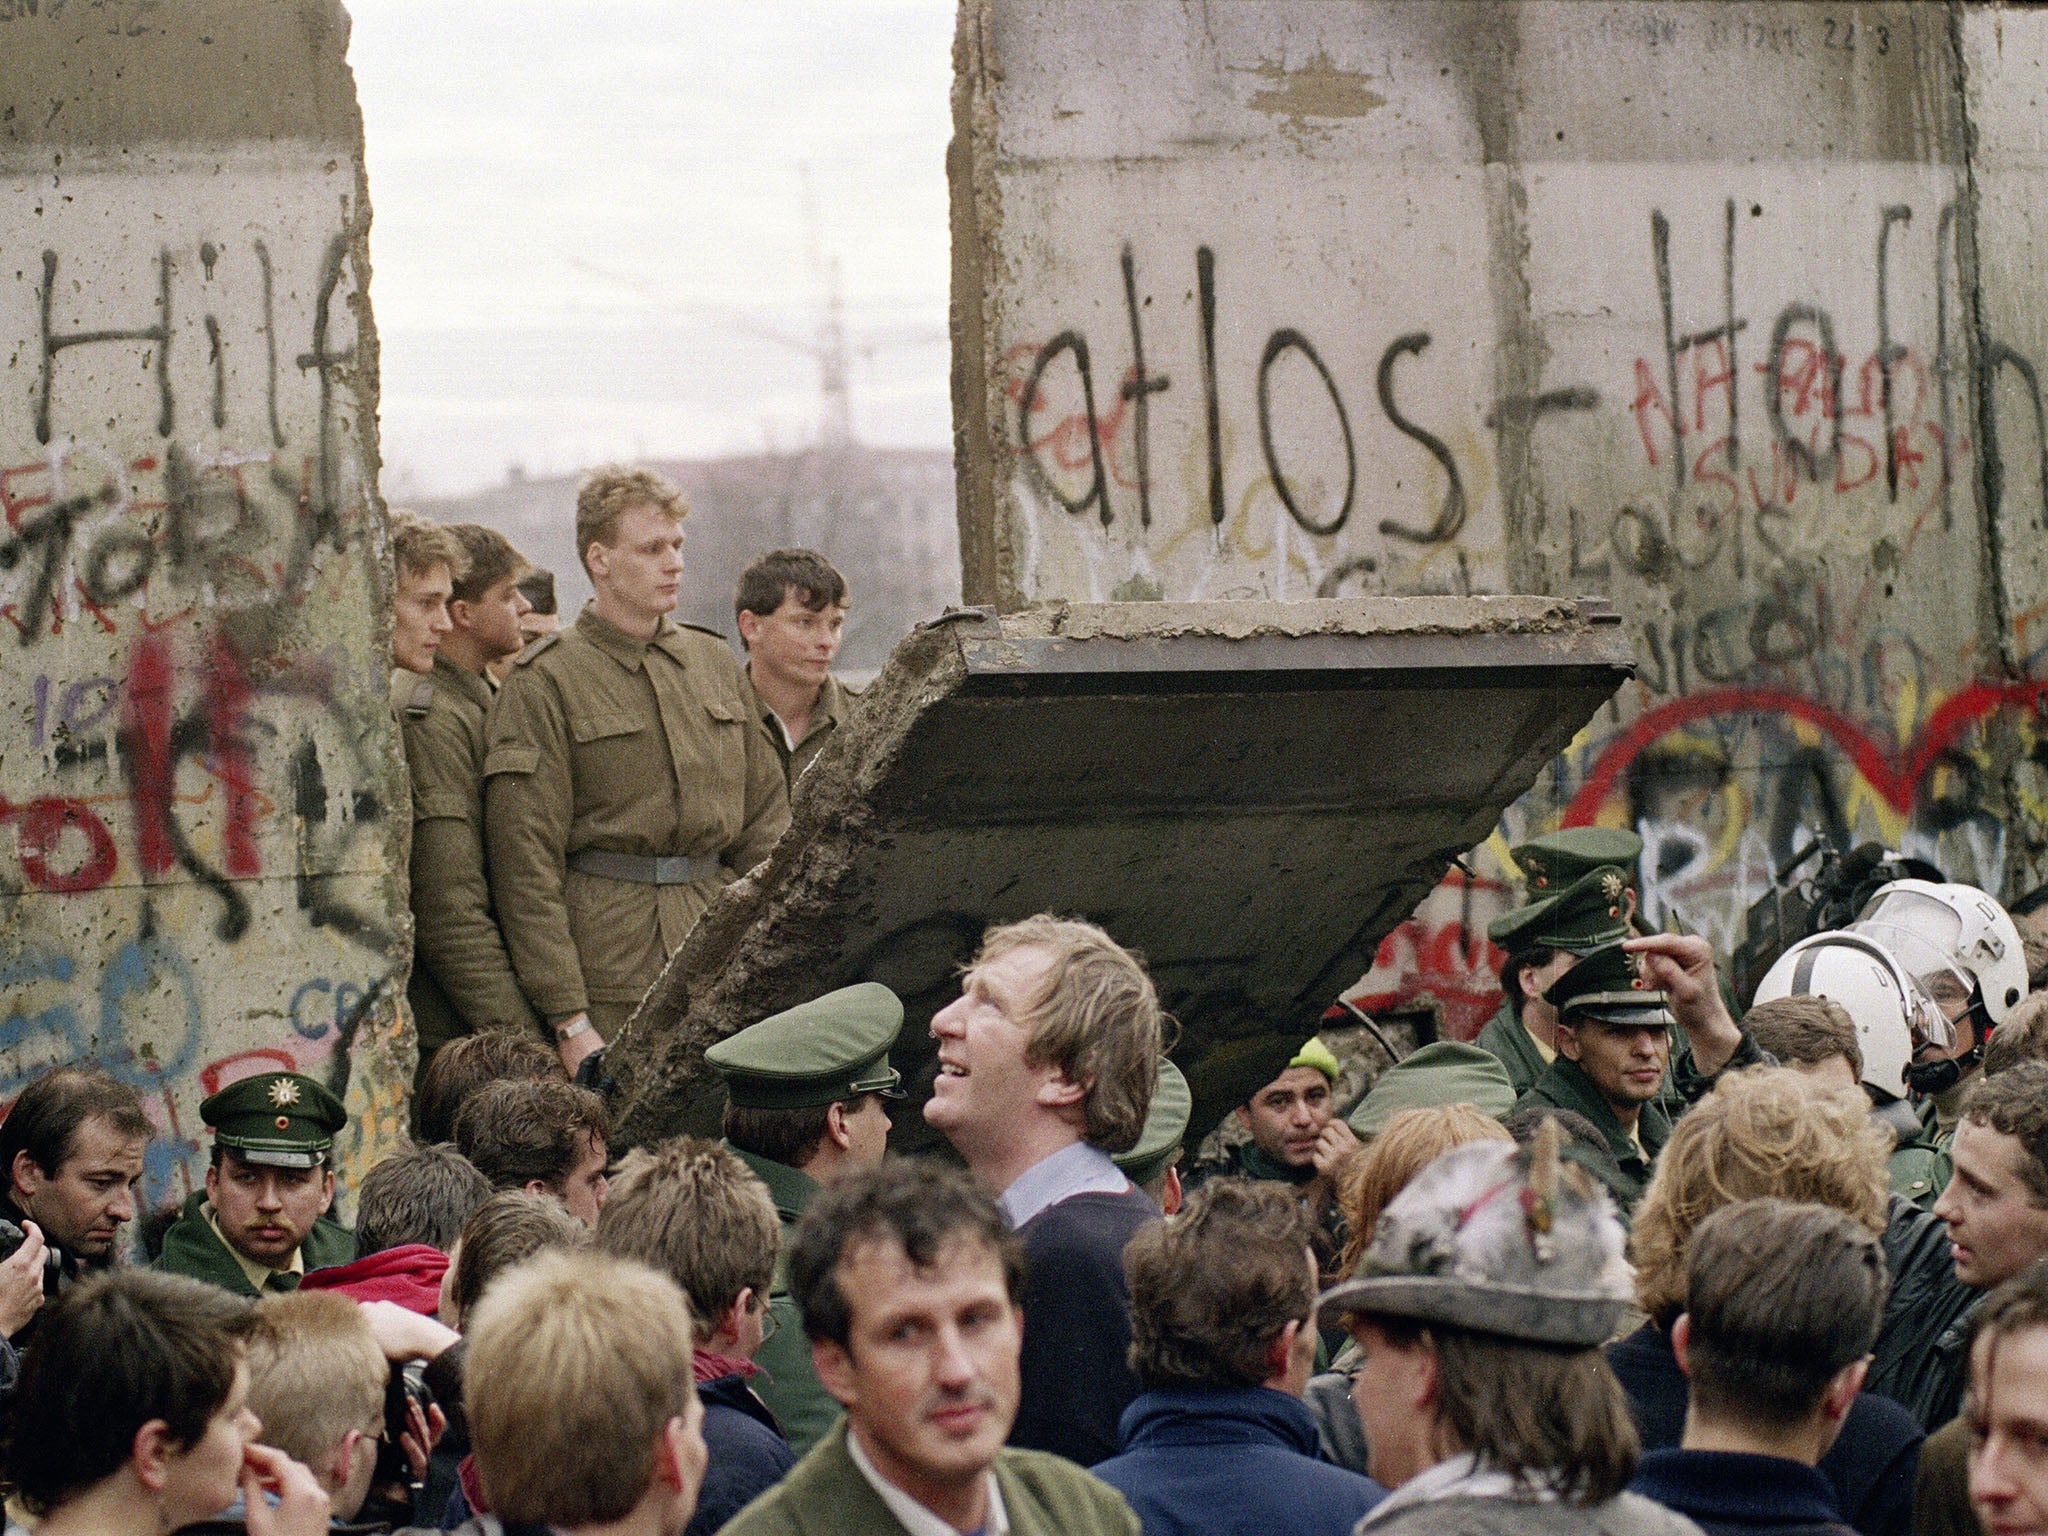 The day the wall came down: East German guards watch on as the concrete division comes tumbling down